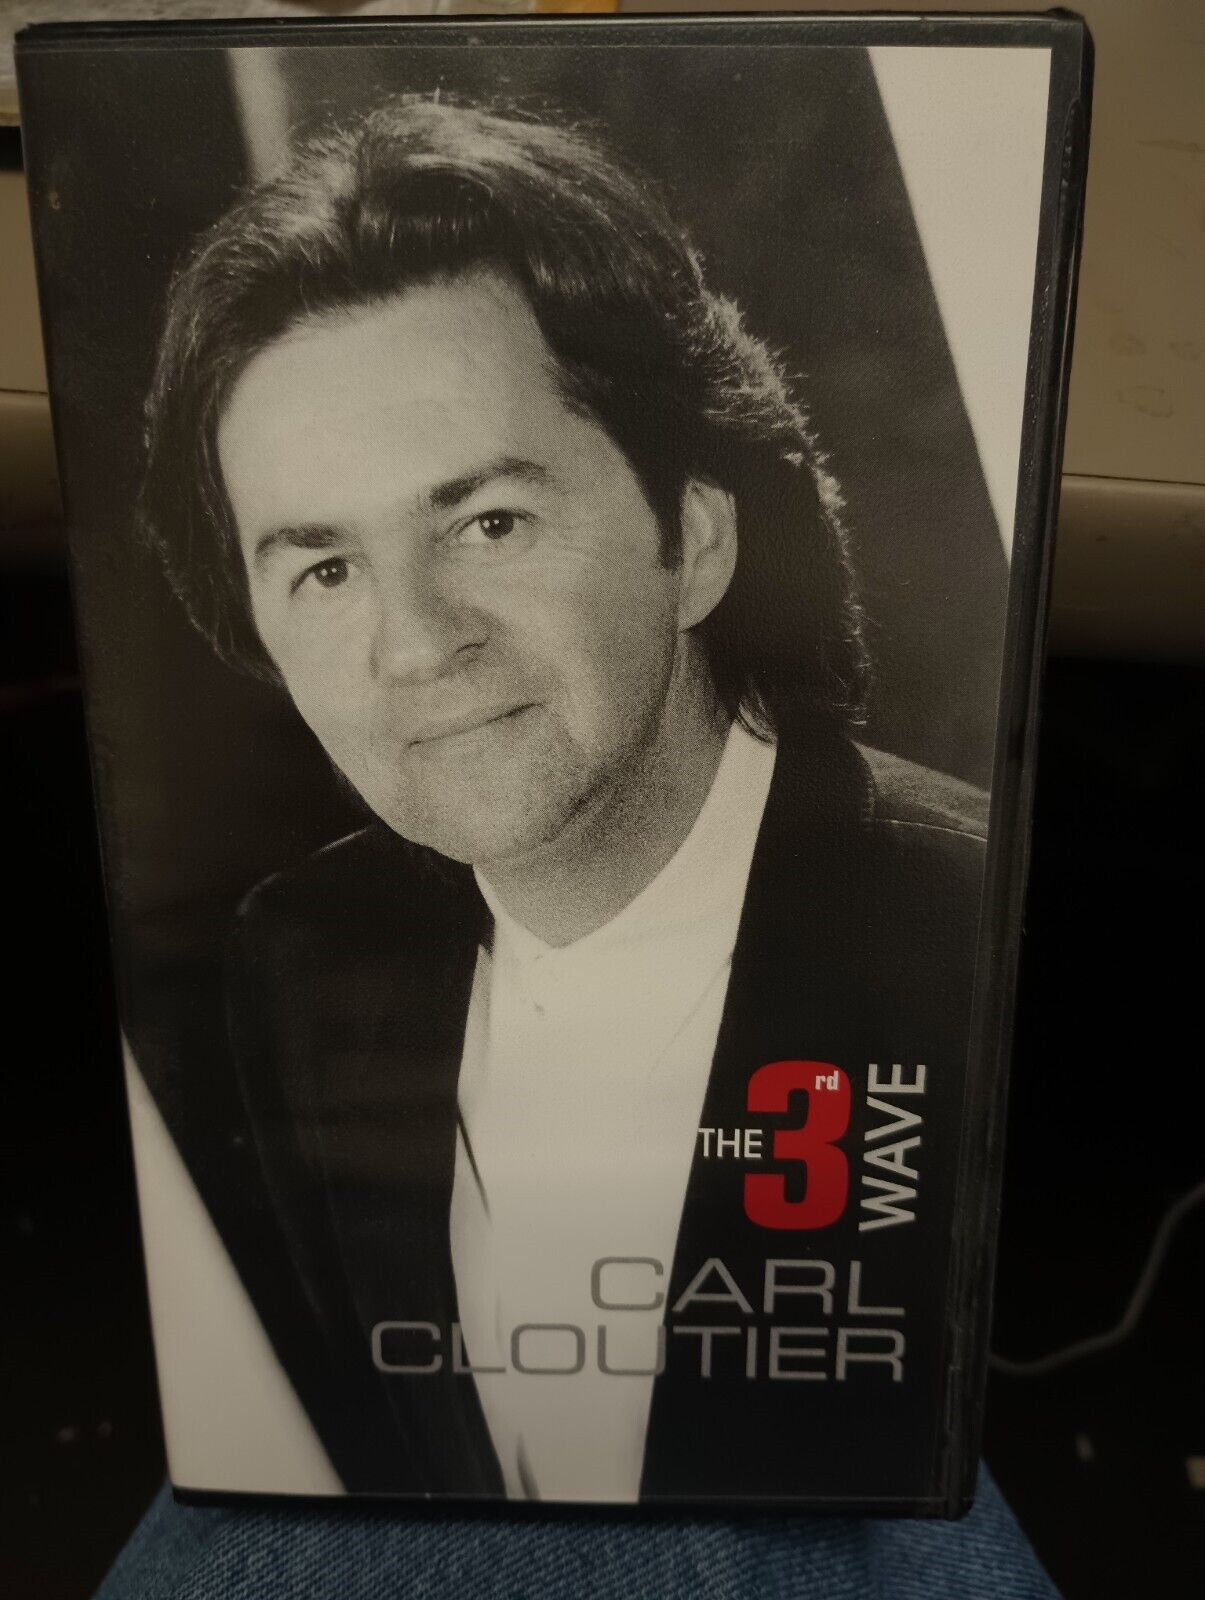 Carl Cloutier The 3rd Wave VHS Video Tape 